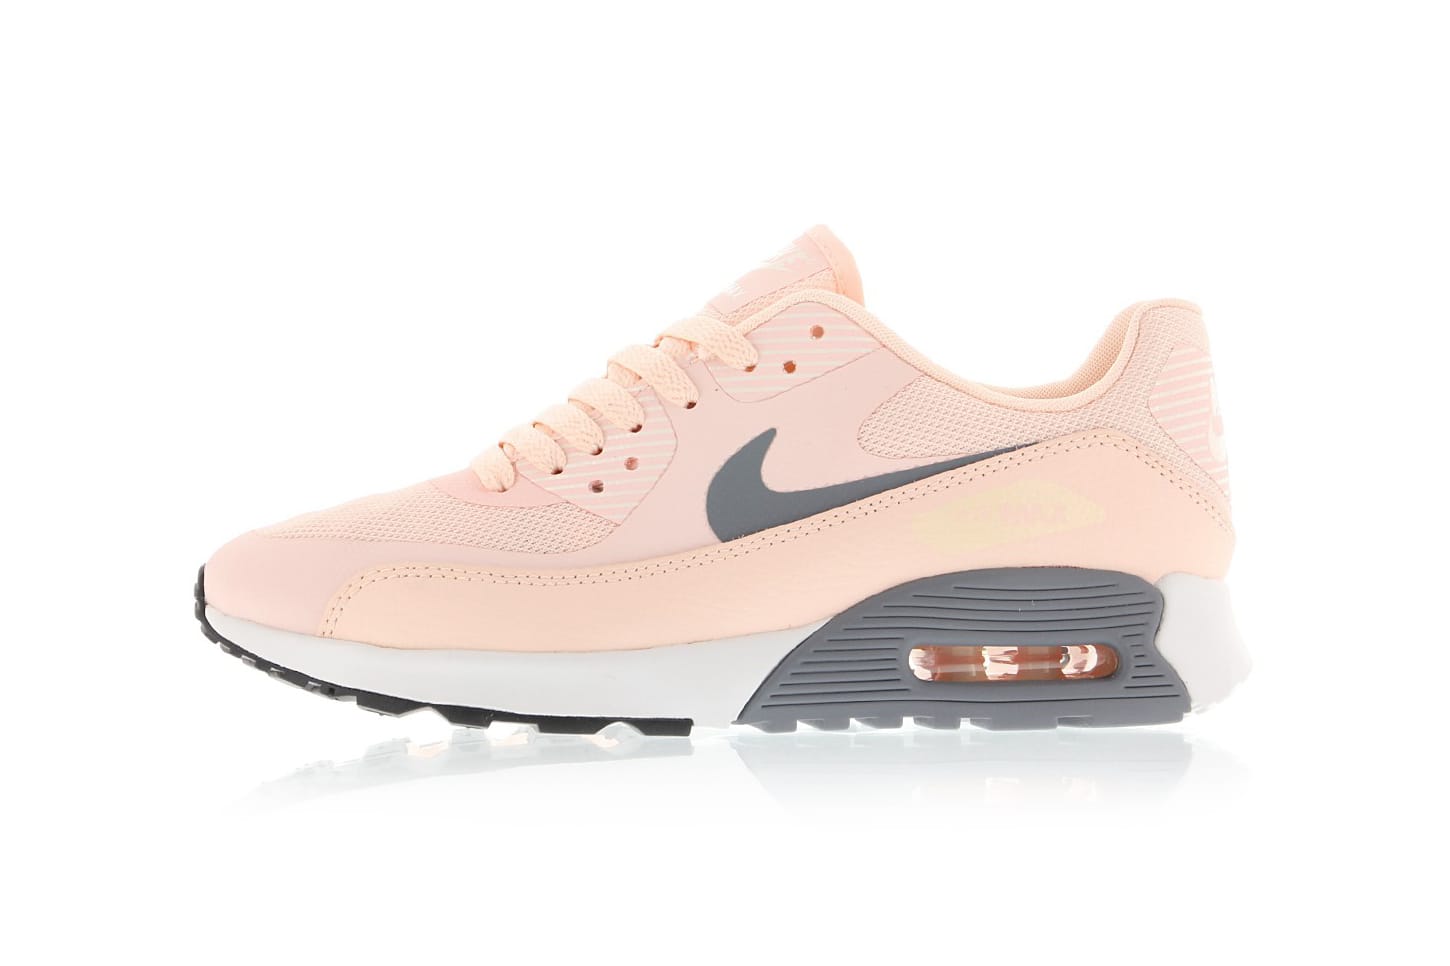 New Nike Air Max 90 Ultra 2.0 Is Pink 